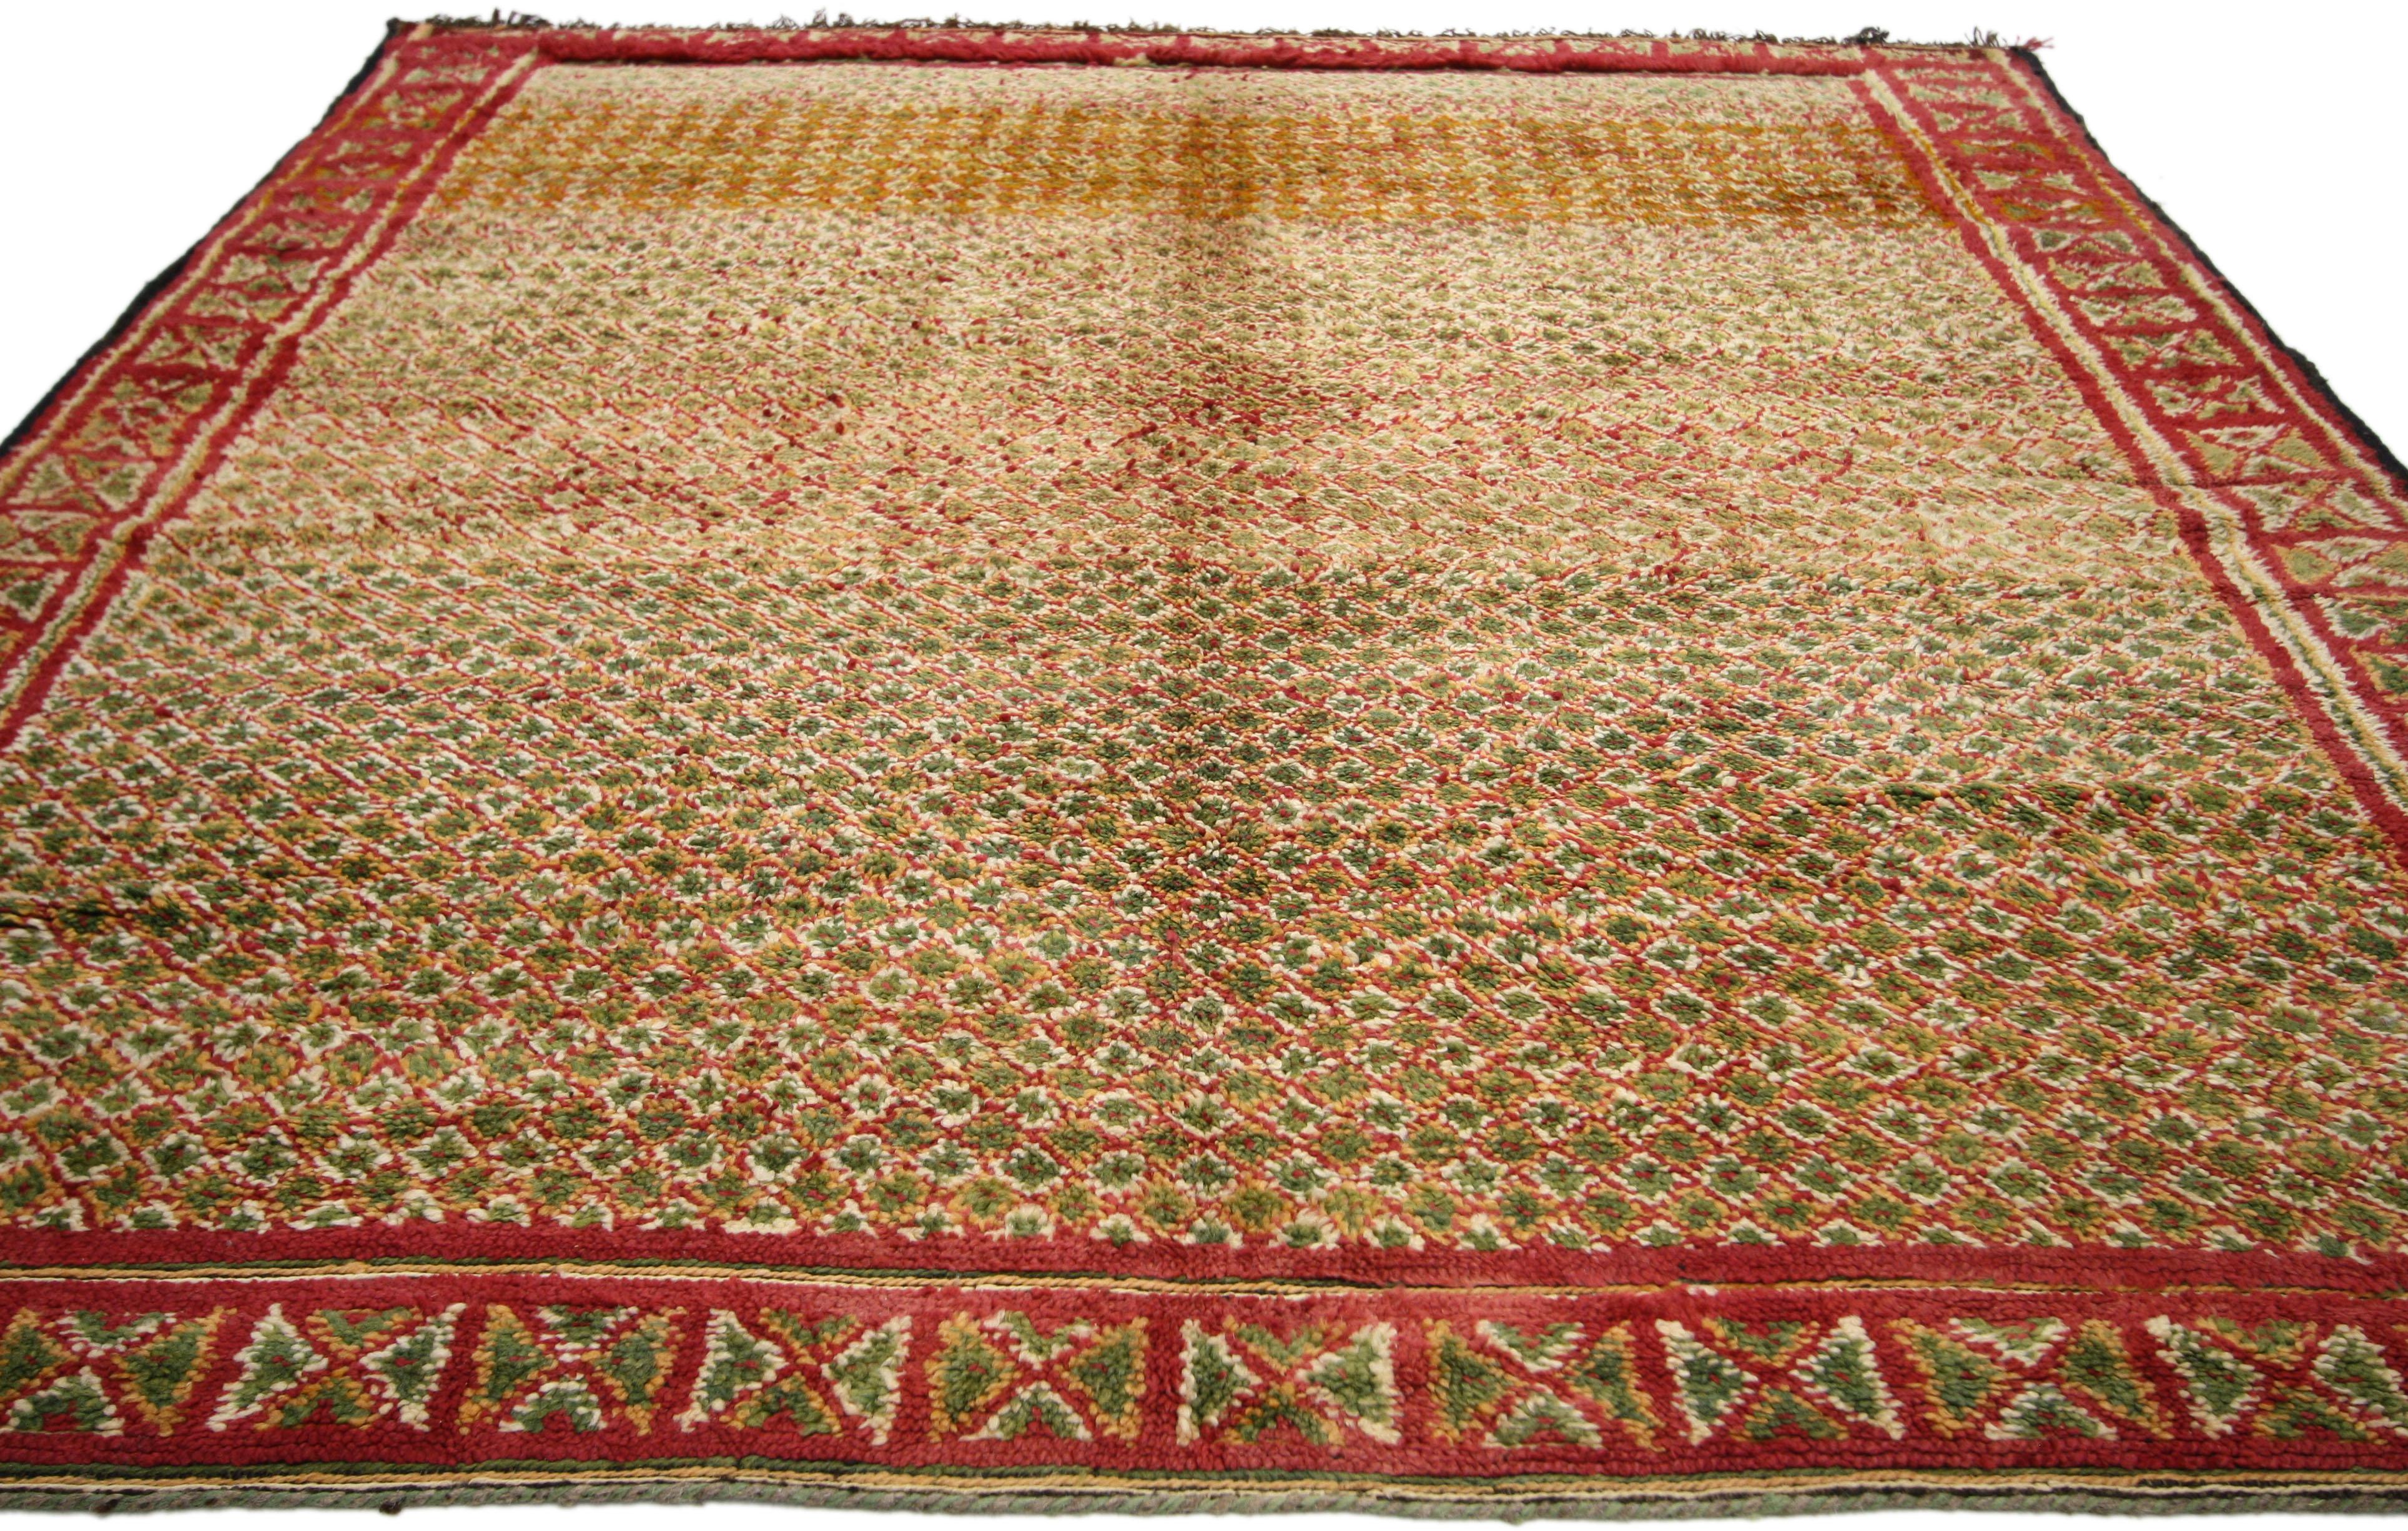 Hand-Knotted Vintage Berber Moroccan Rug with Tribal Style, Earthy Rustic Moroccan Berber Rug